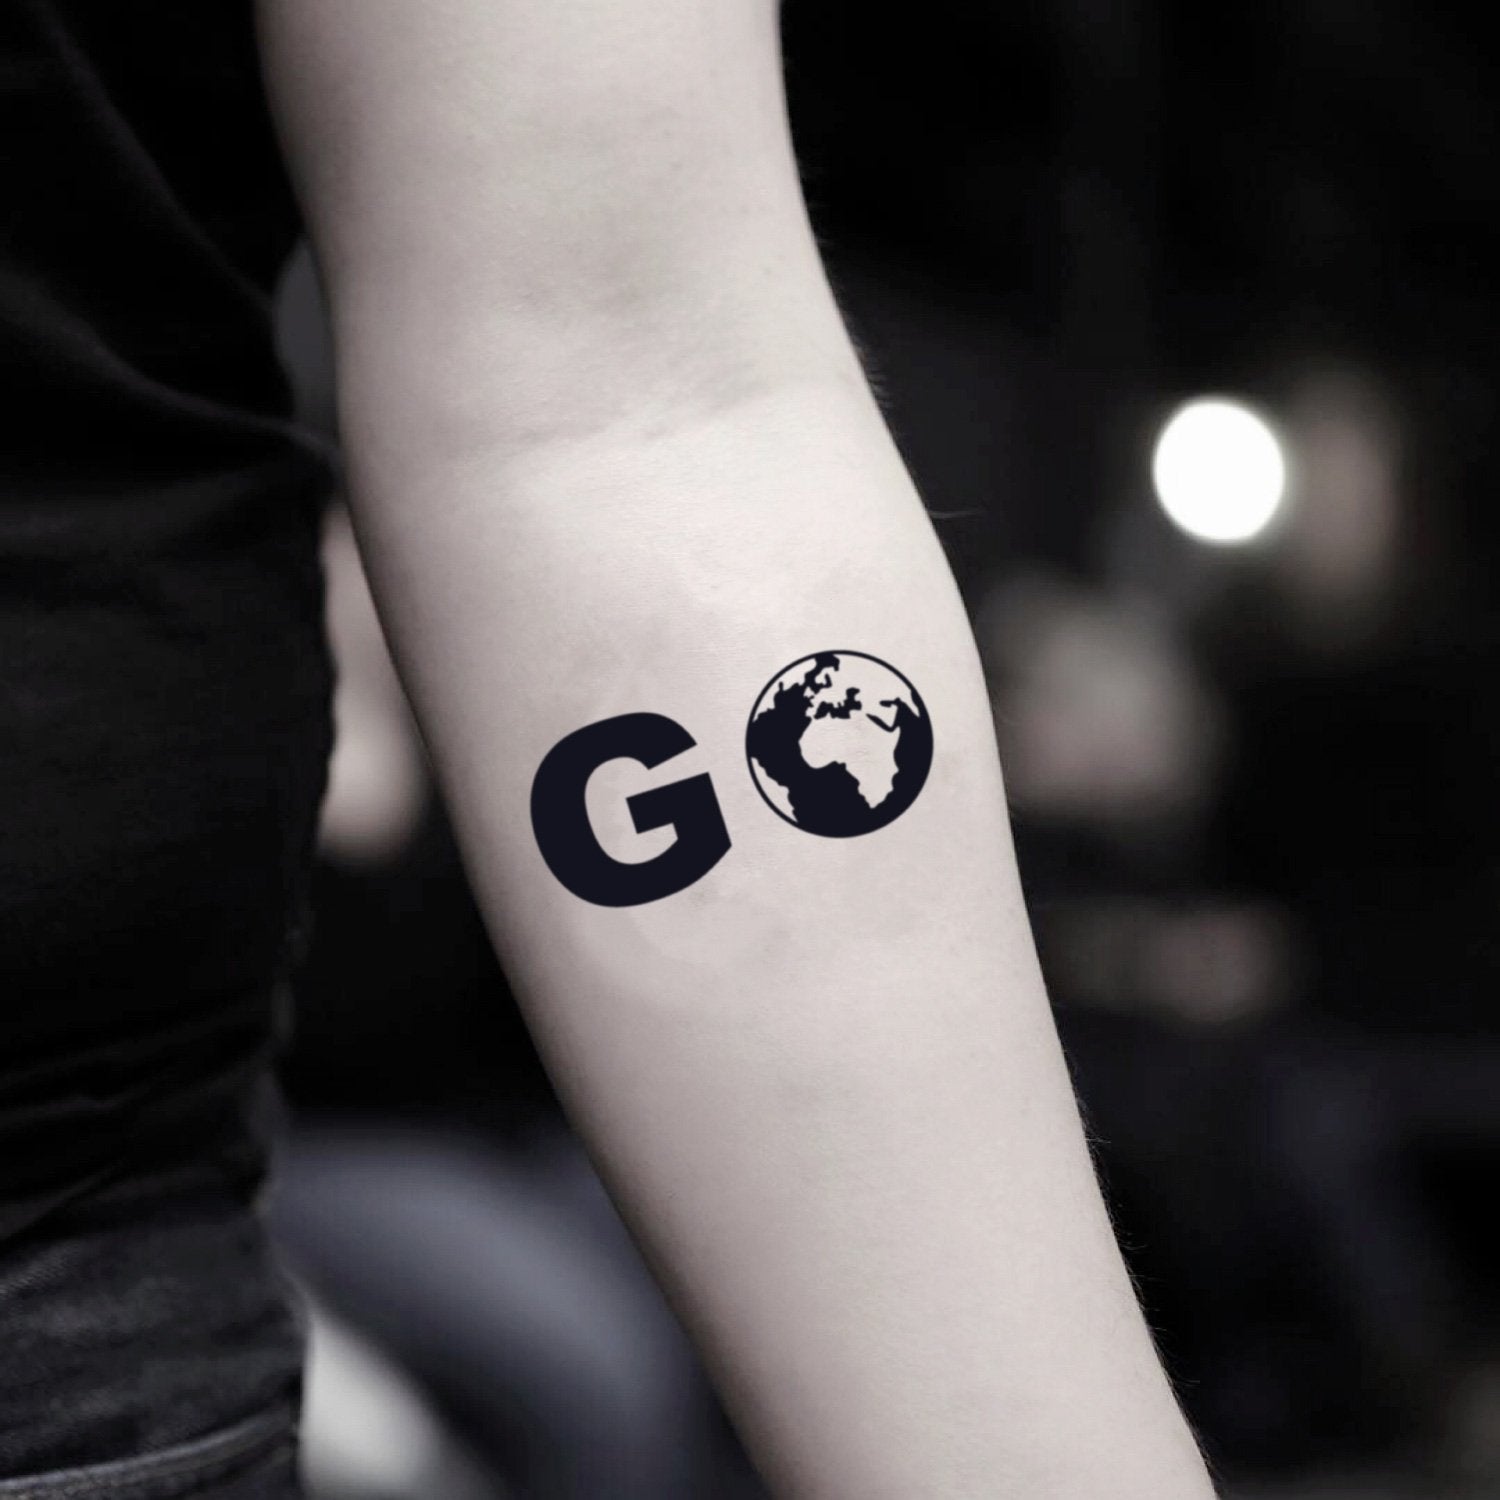 Common Mistakes to Avoid When Getting a Tattoo • Tattoodo